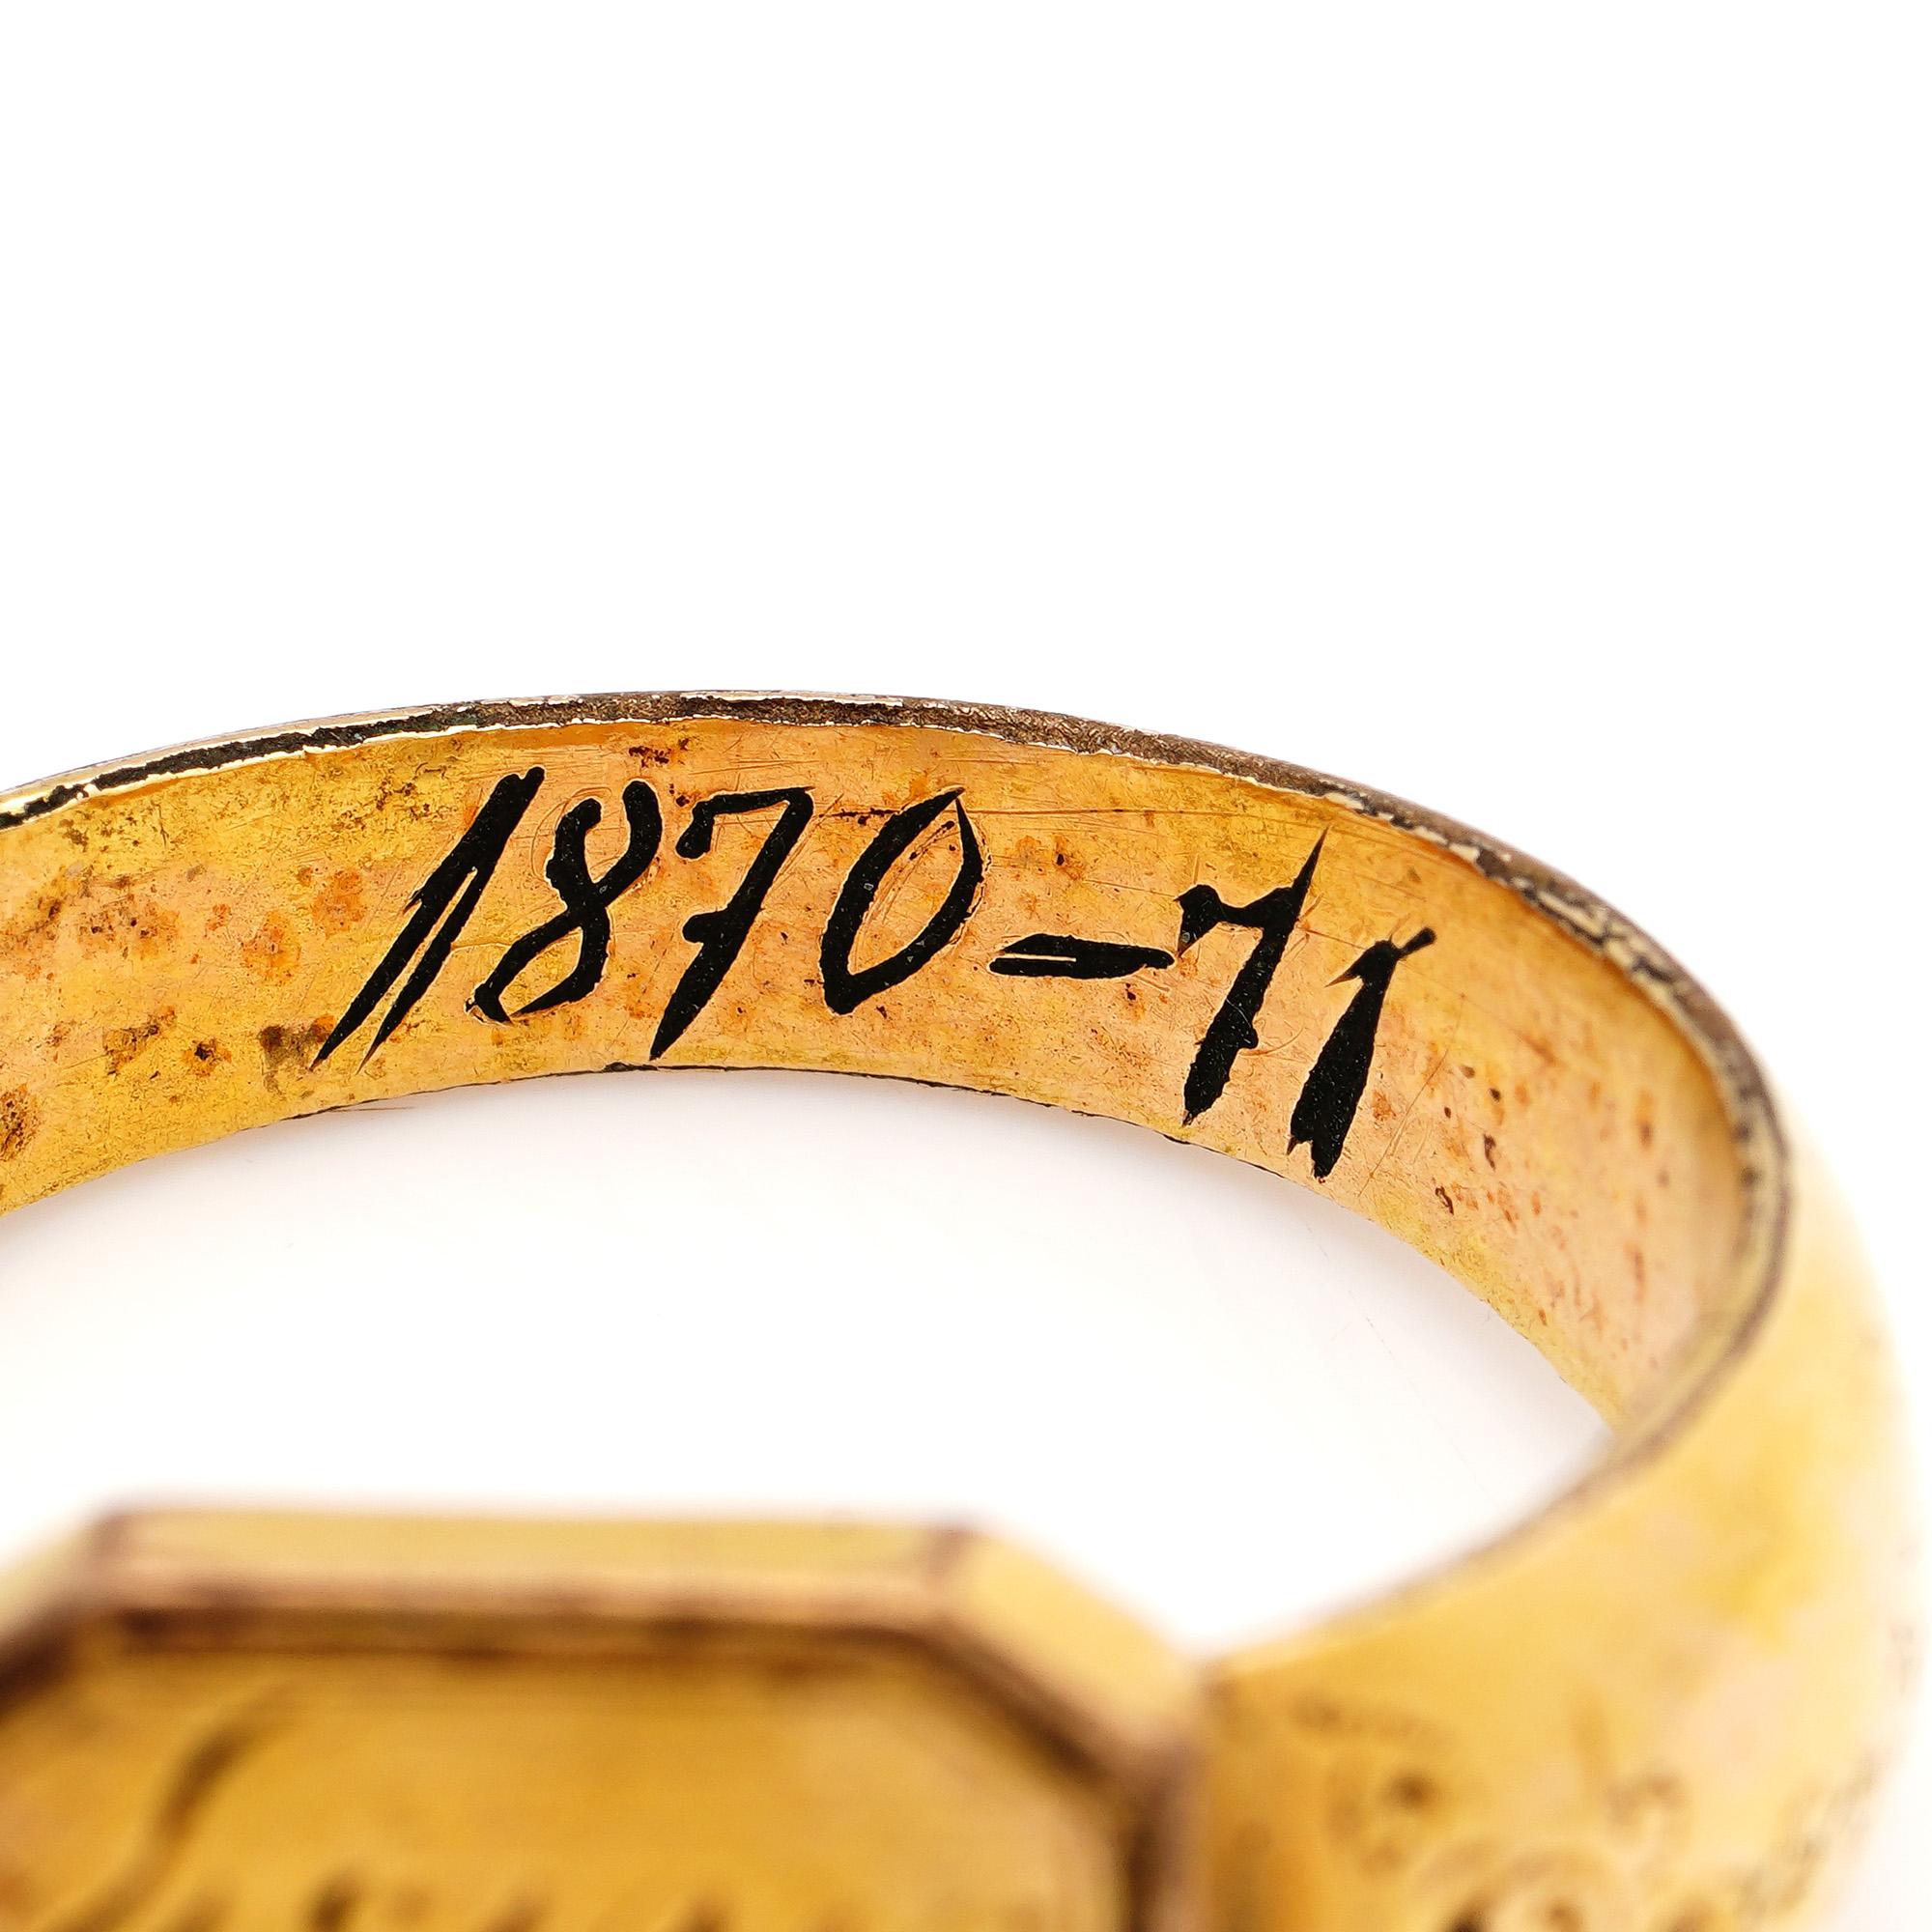 Franco Prussian War Brass Signet Ring with the Inscription 'Fort Noisy' In Good Condition For Sale In Braintree, GB